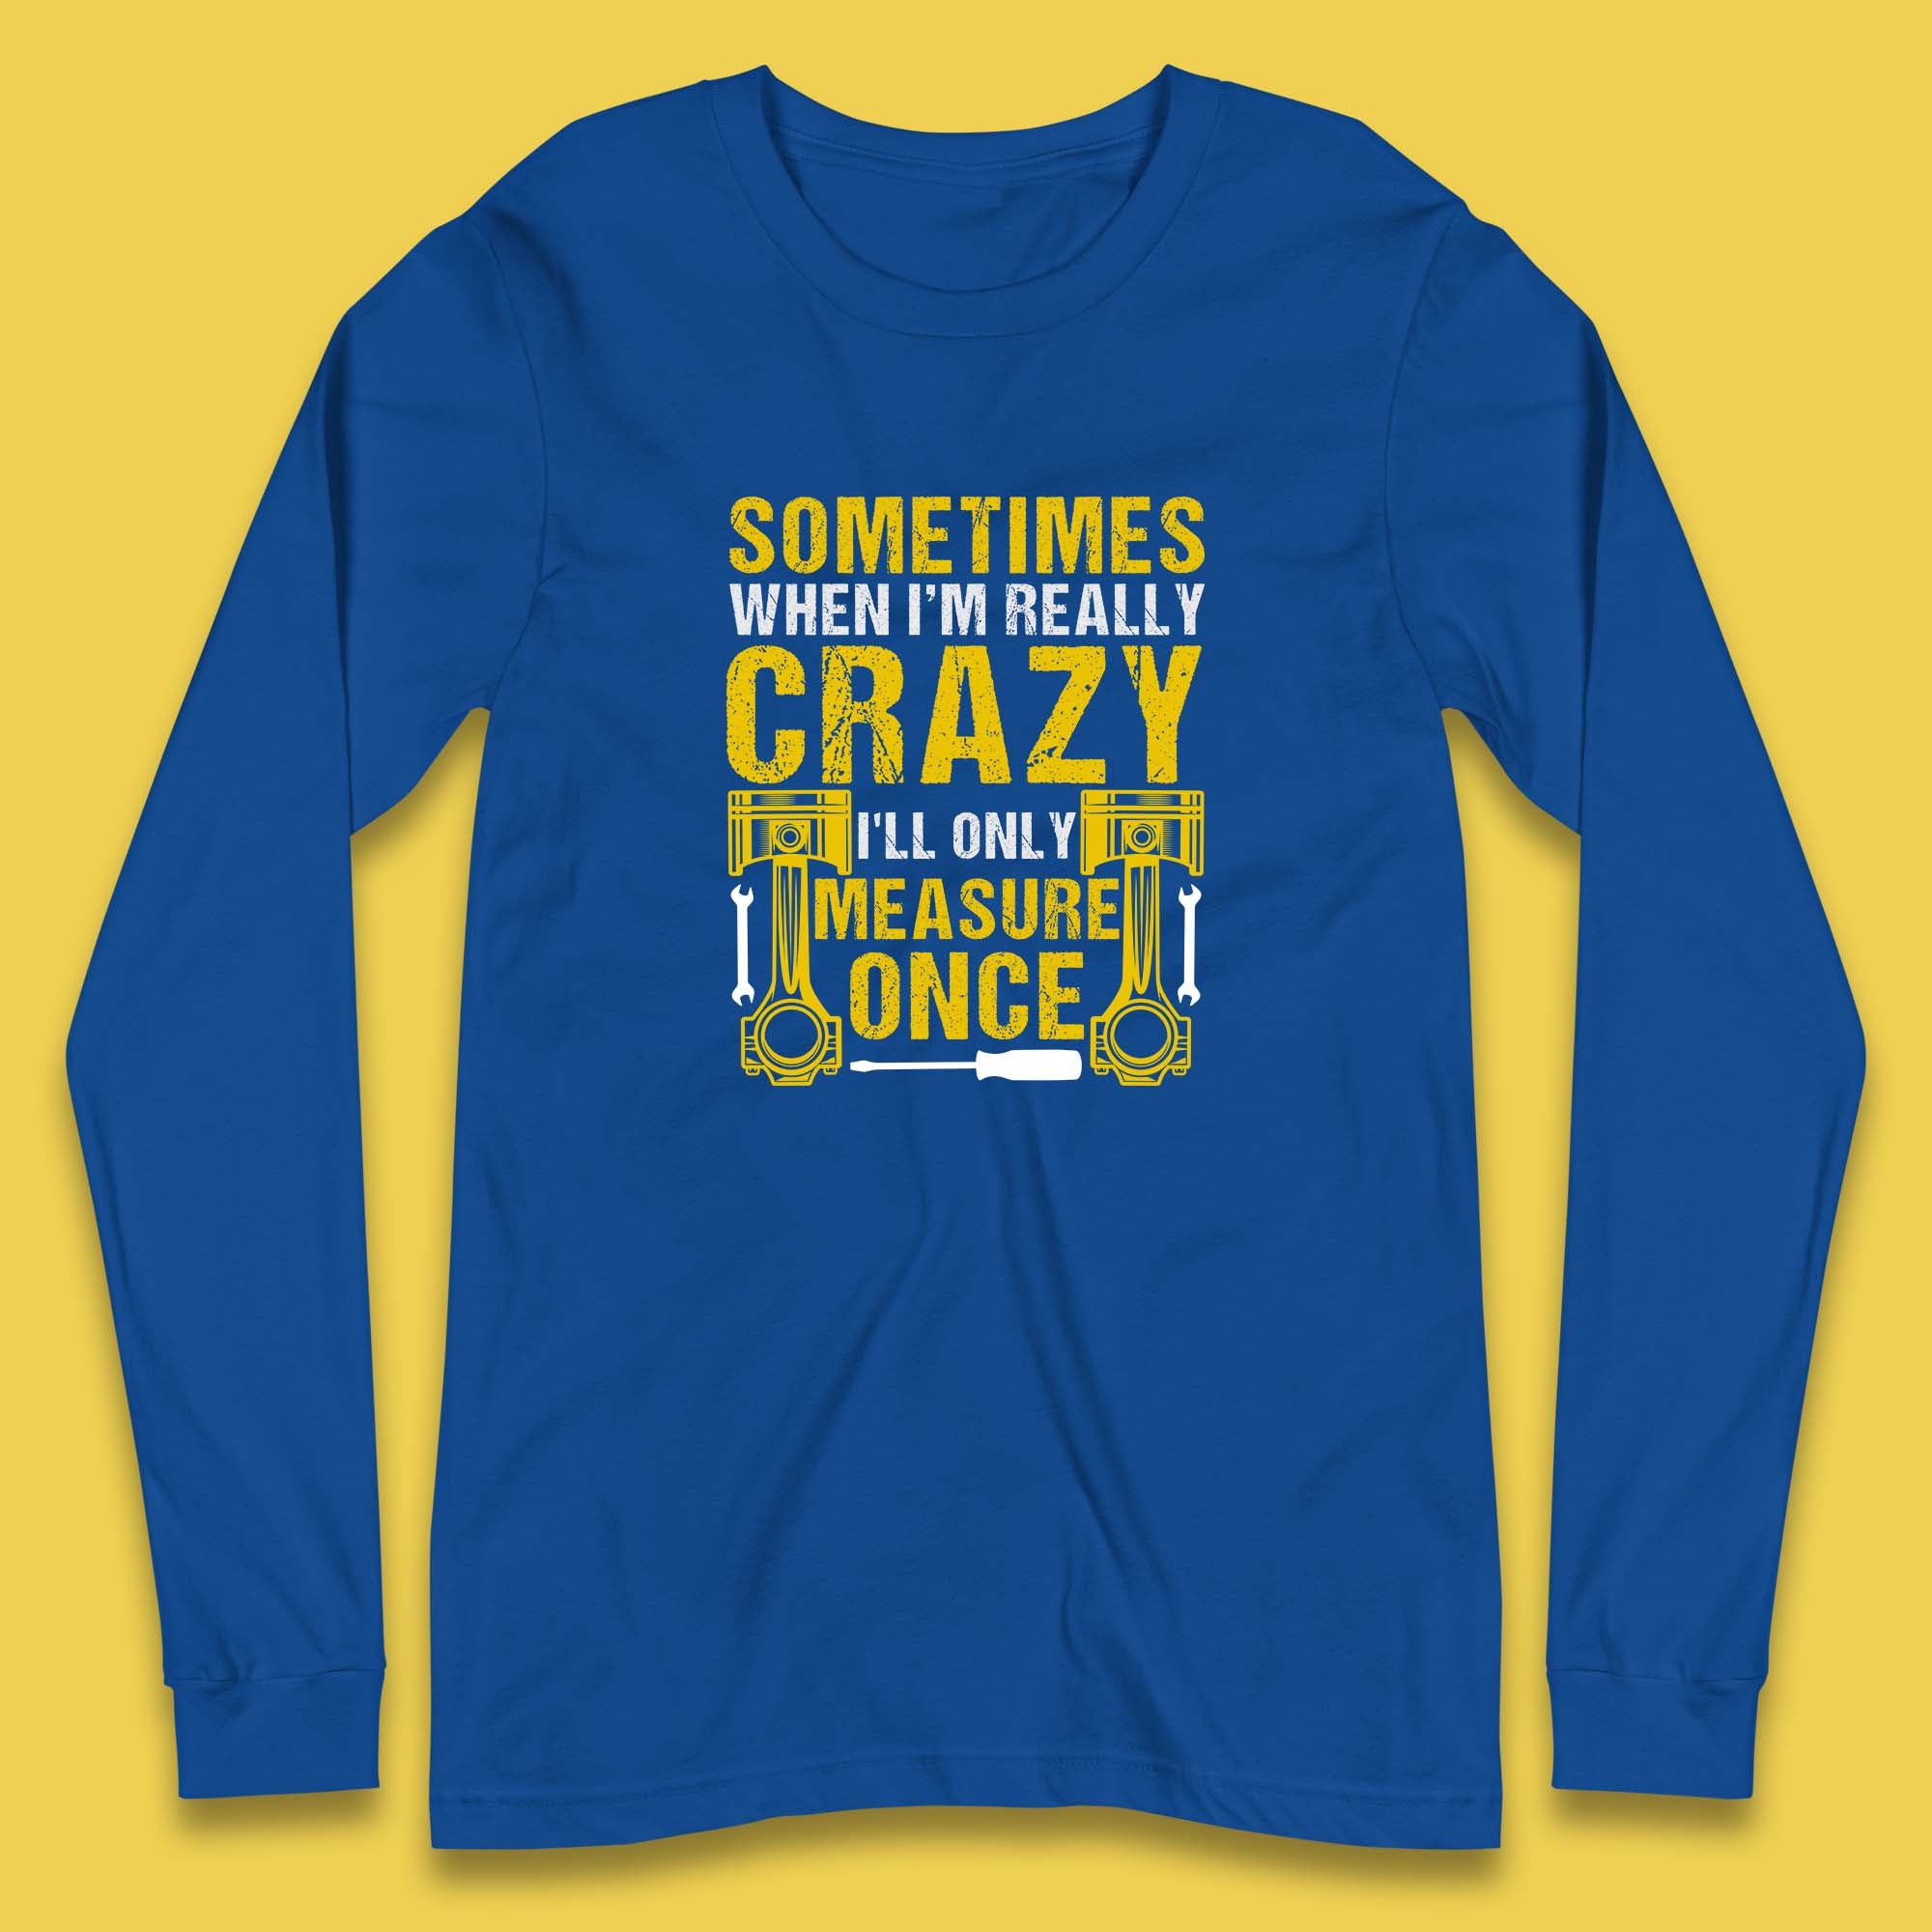 Sometimes When I'm Really Crazy I'll Only Measure Once Funny Handyman Gift Long Sleeve T Shirt